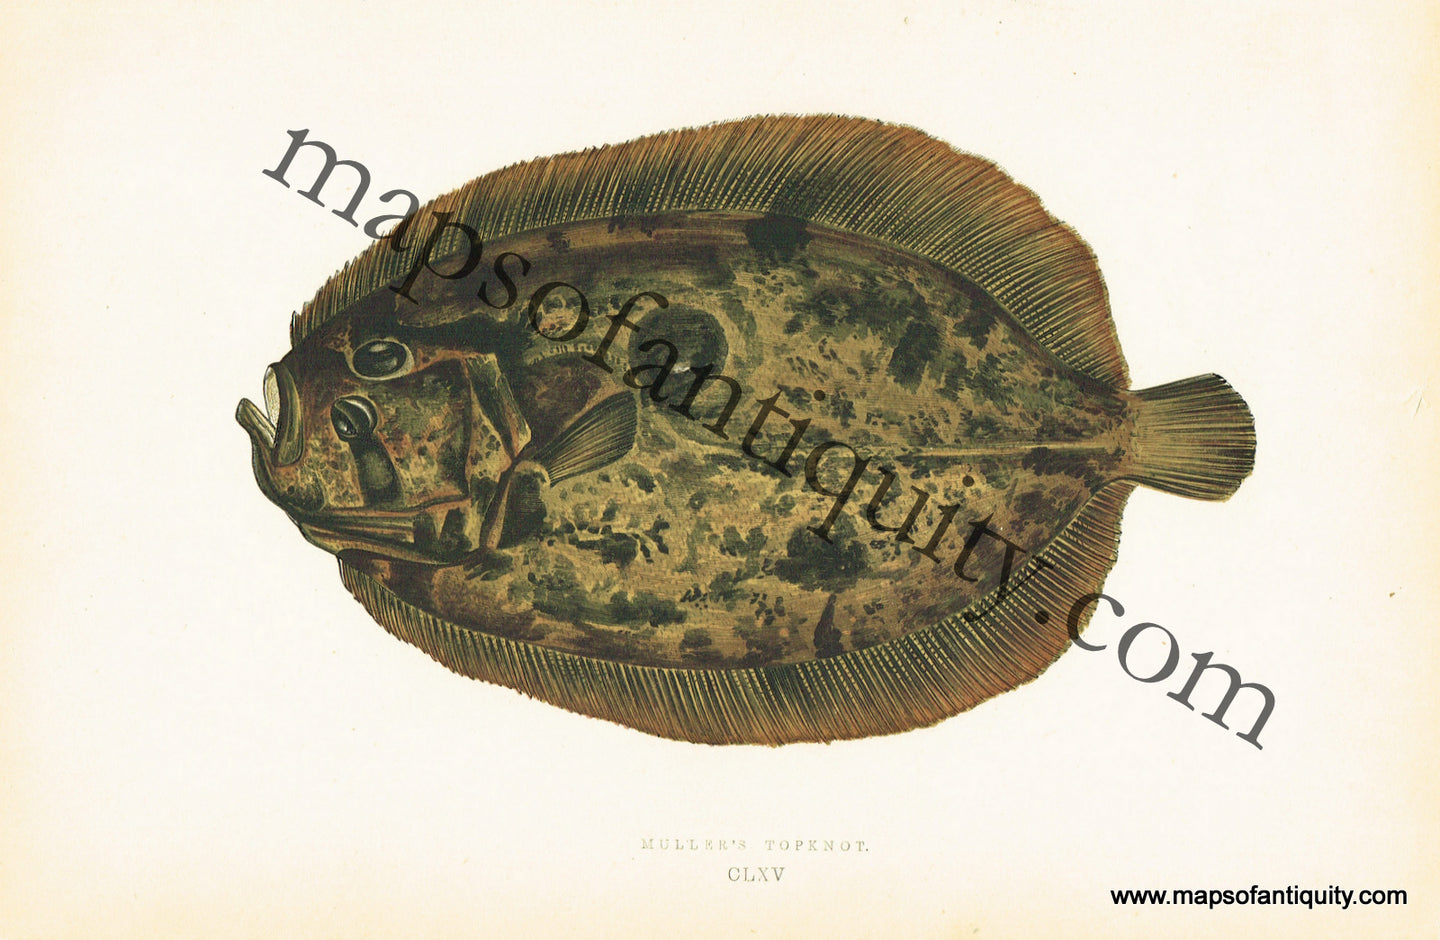 Antique-Colored-Litho-Print-Muller's-Topknot-CLXV-Natural-History-Prints-Fish-1877-Couch-Maps-Of-Antiquity